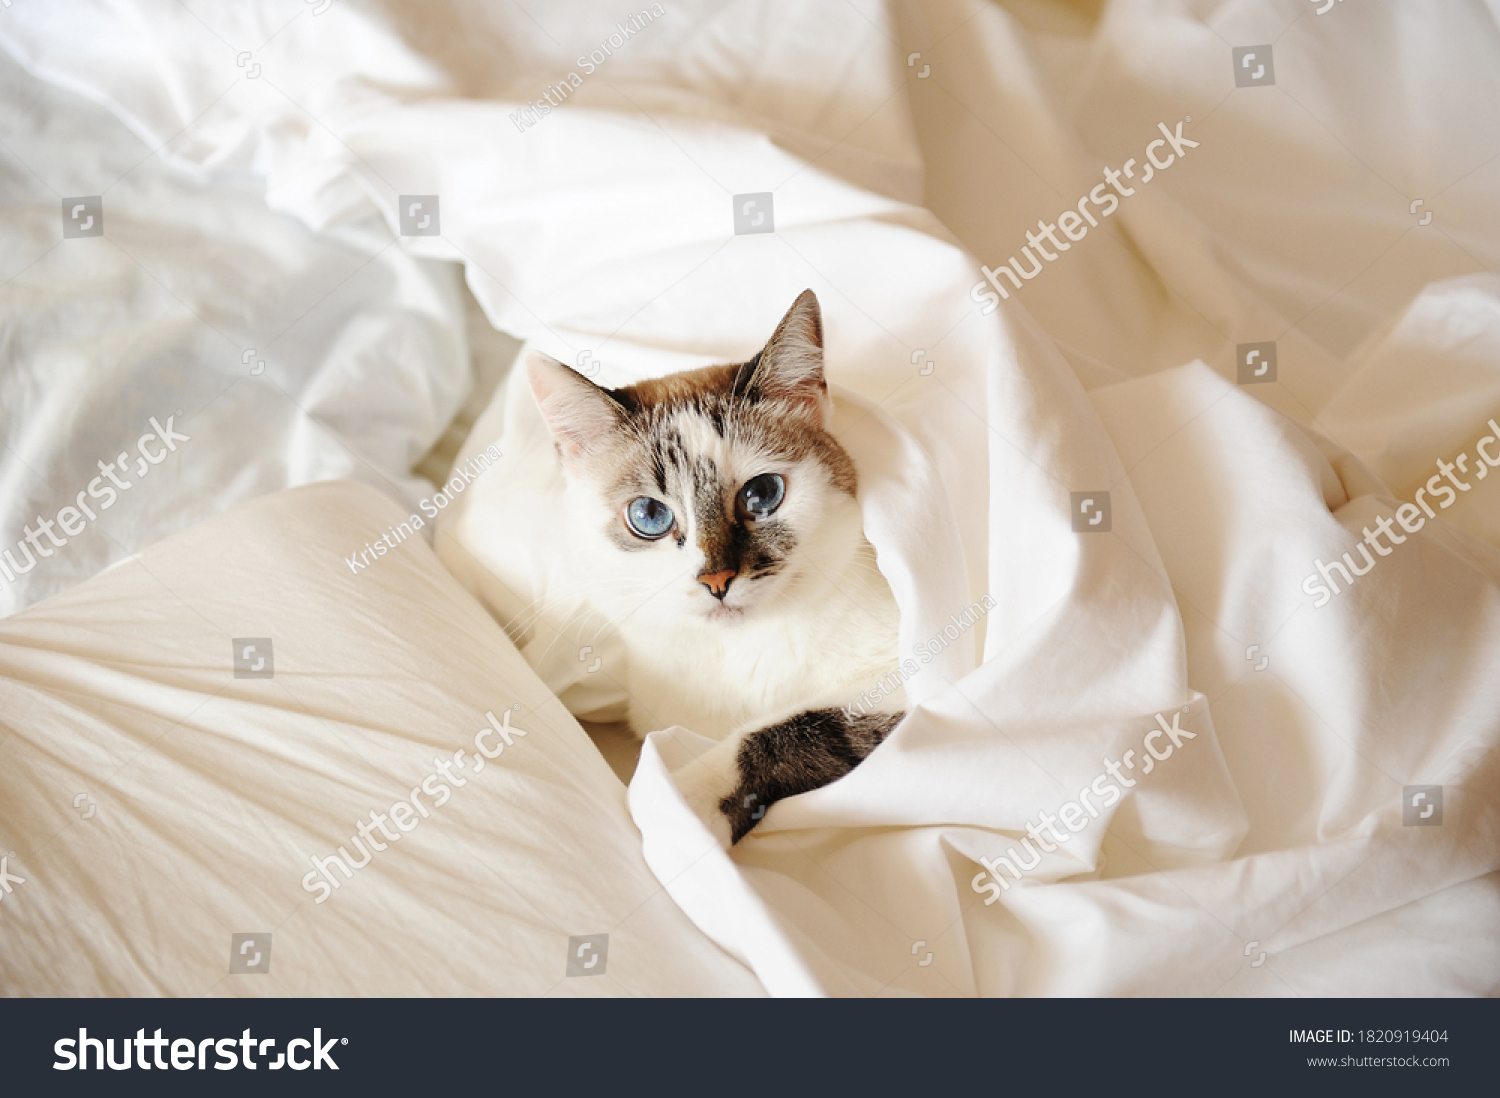 Cute blue eyed cat sleeping in bed covered with a blanket. White linens #1820919404